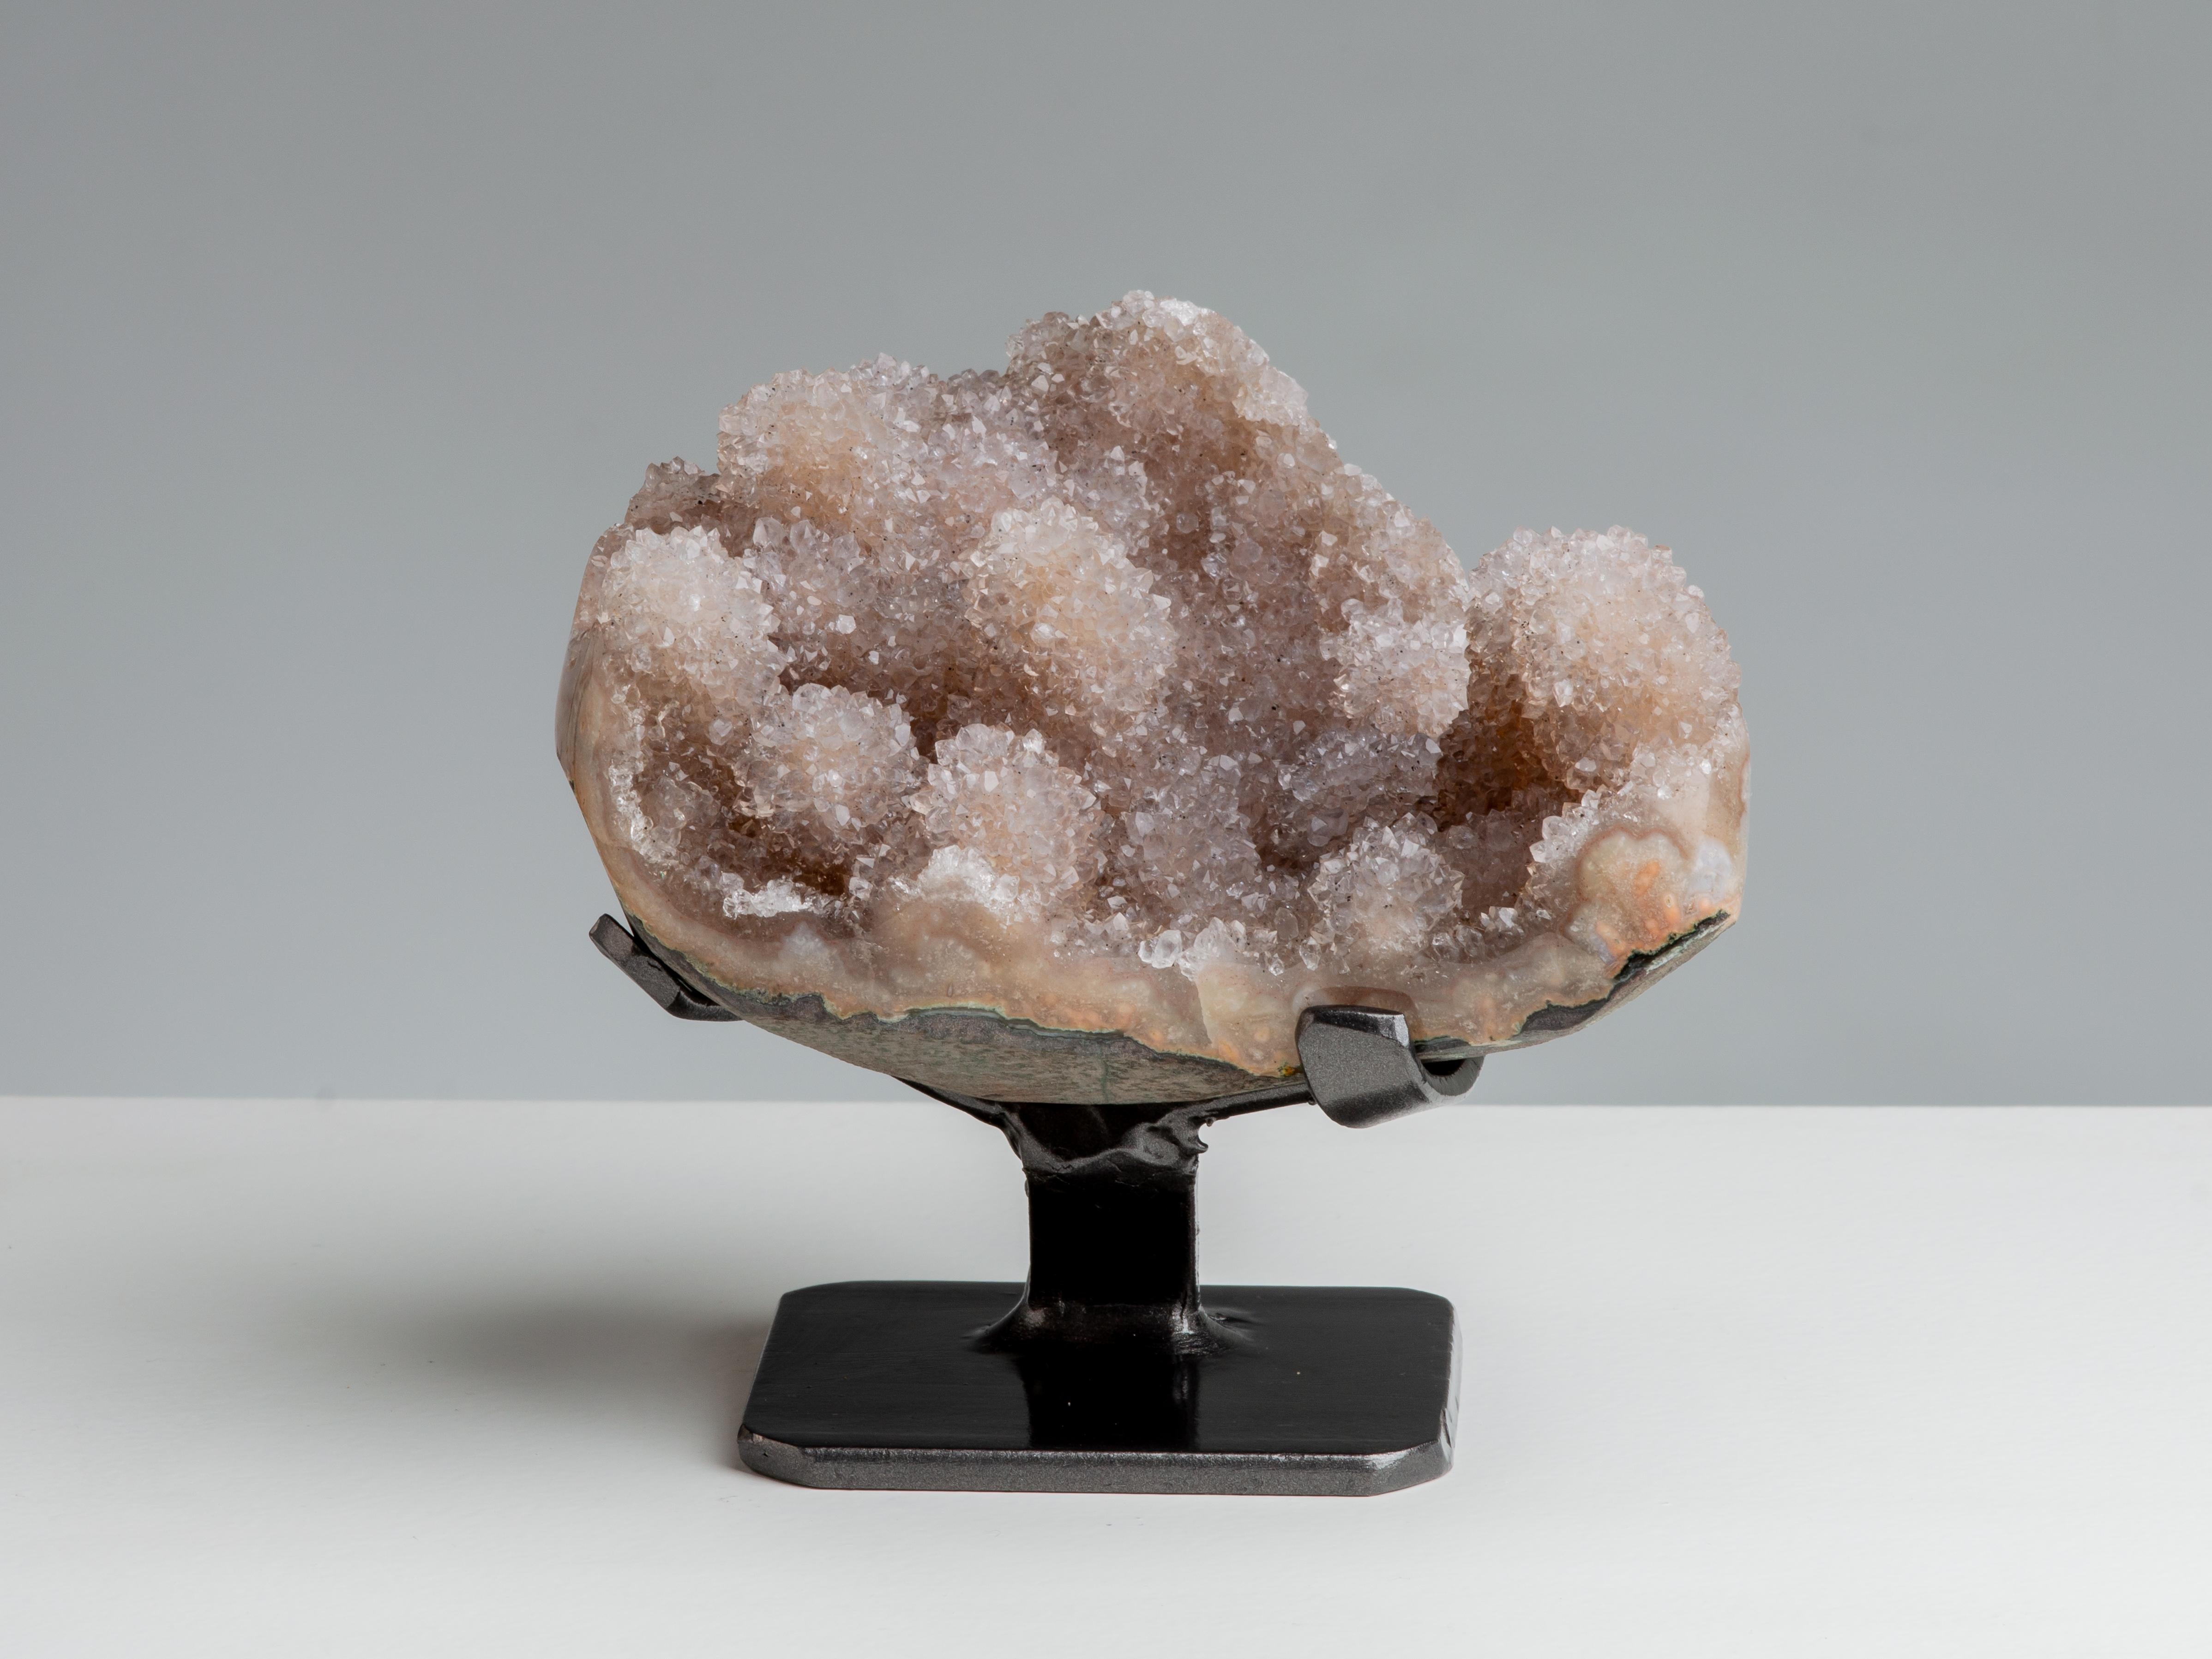 Several small stalactites adorn this piece, covered in light orange druzy quartz.

This piece was legally and ethically sourced directly in the prestigious mines of Uruguay, South America. Uruguayan amethyst is internationally recognized as being